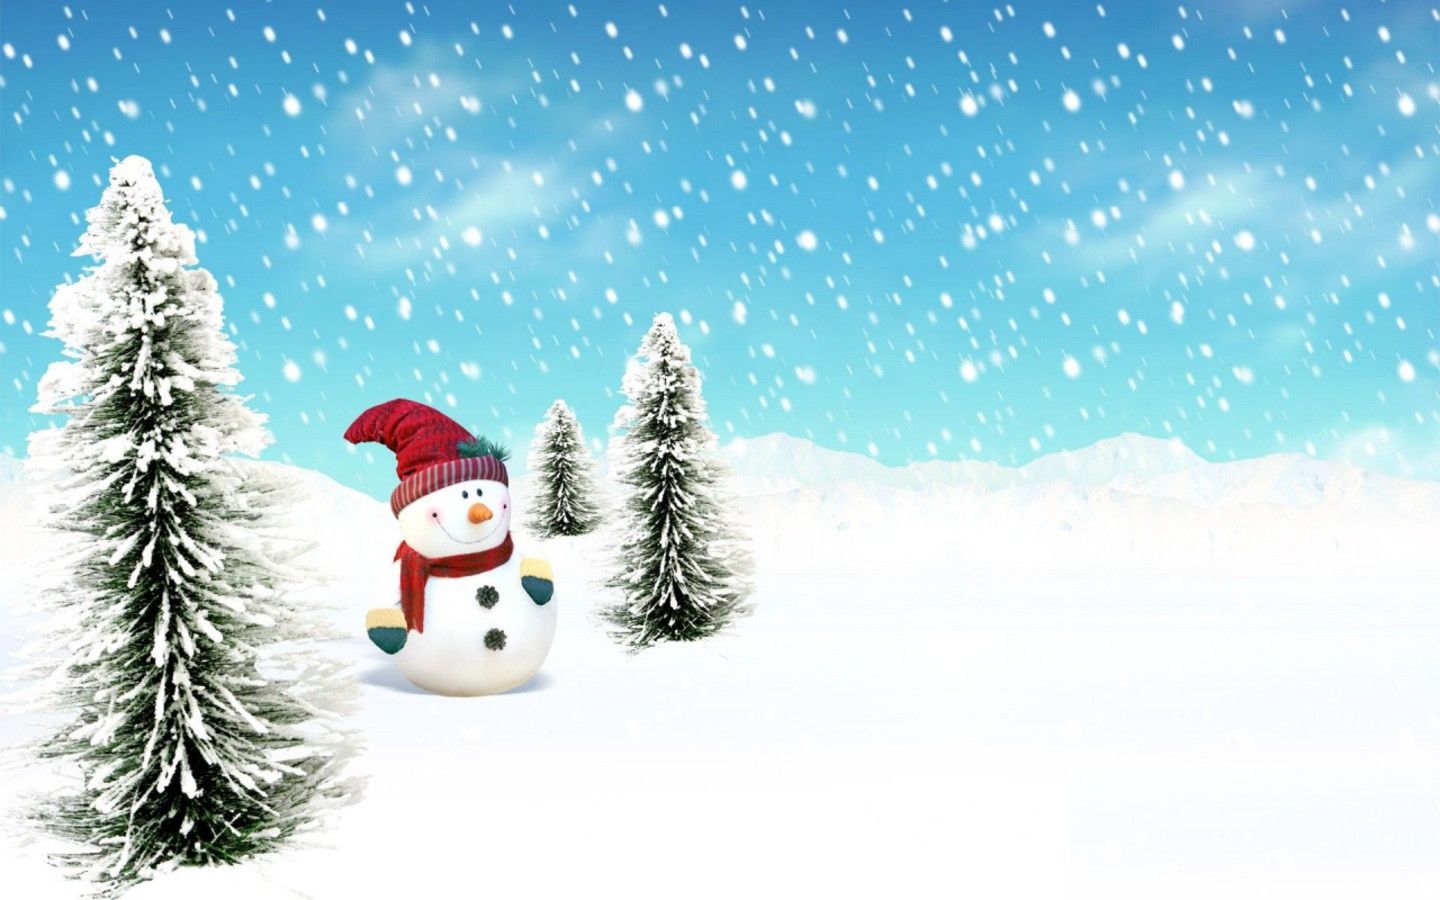 Free Snowman Wallpapers - Wallpaper Cave